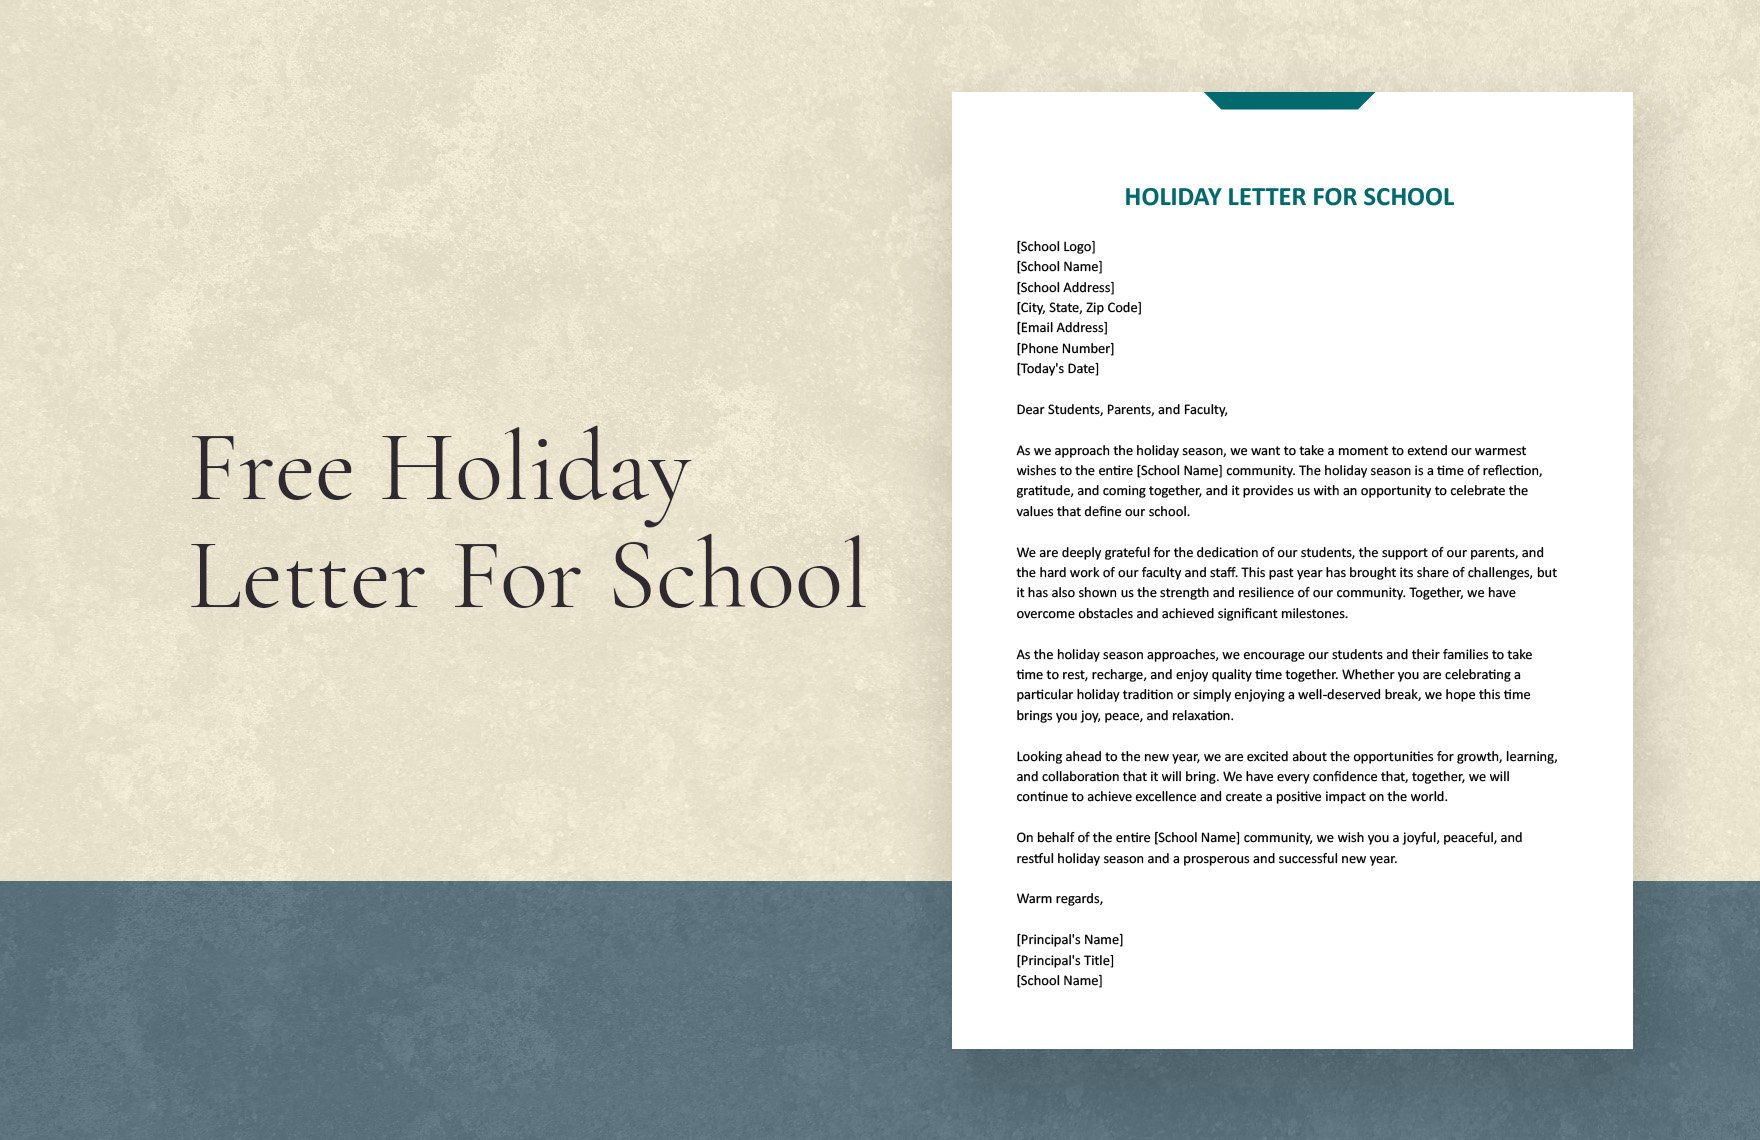 Holiday Letter For School in Word, Google Docs